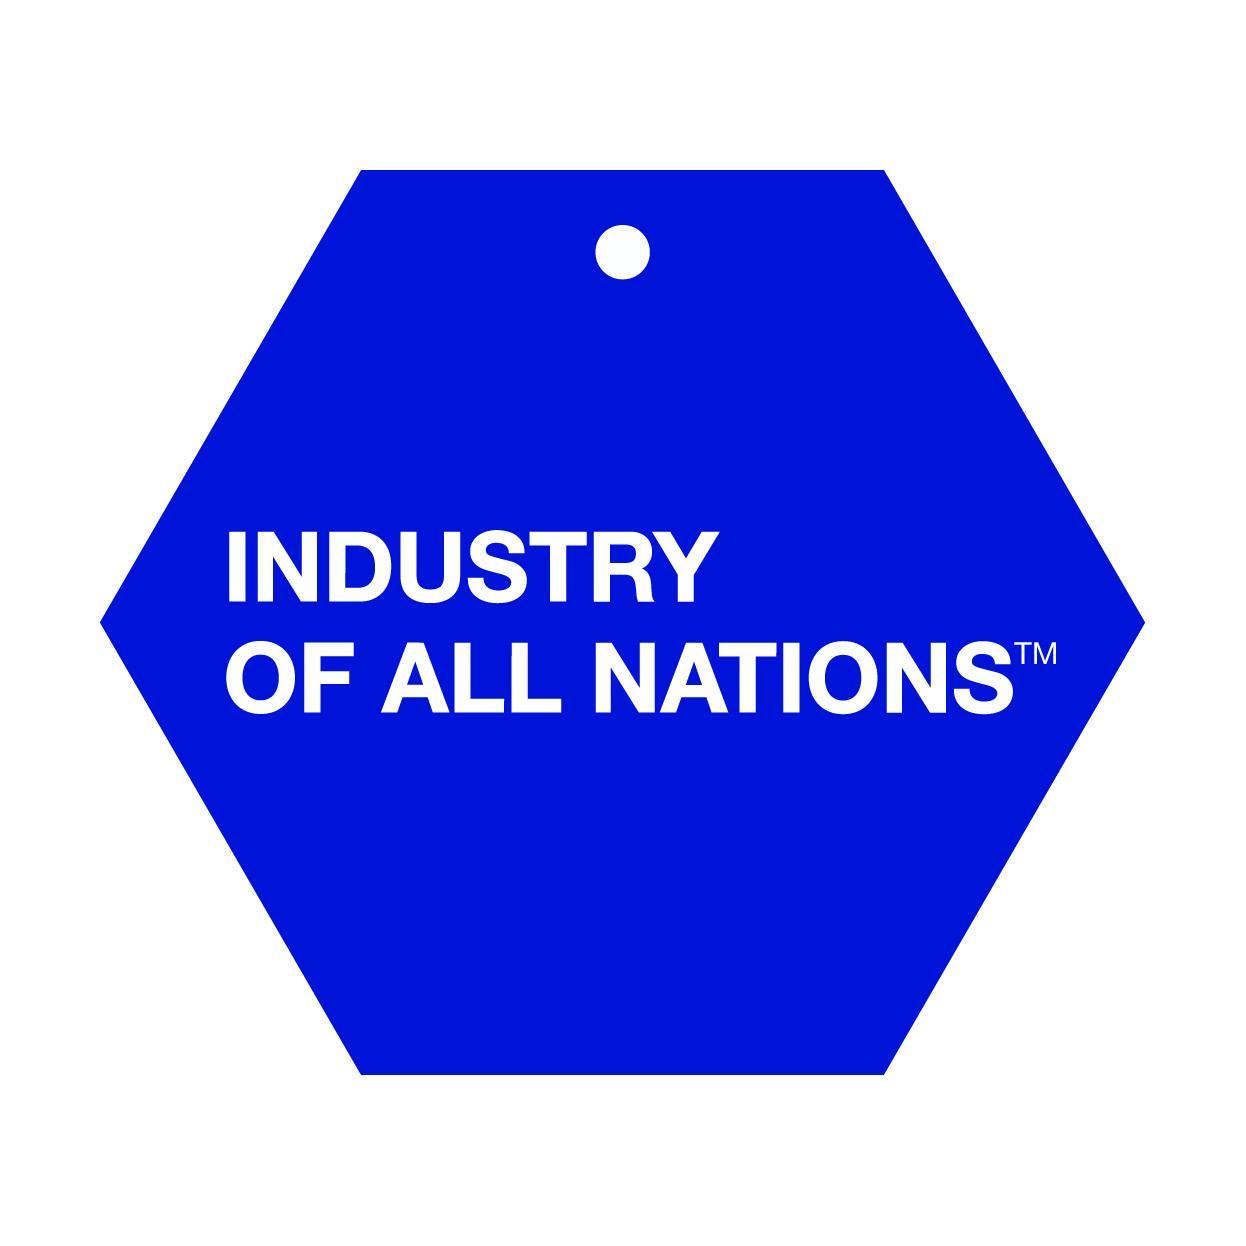 IOAN™ takes manufacturing back to the regions where products and materials originate. Responsible productions = more civilized options for consumers.